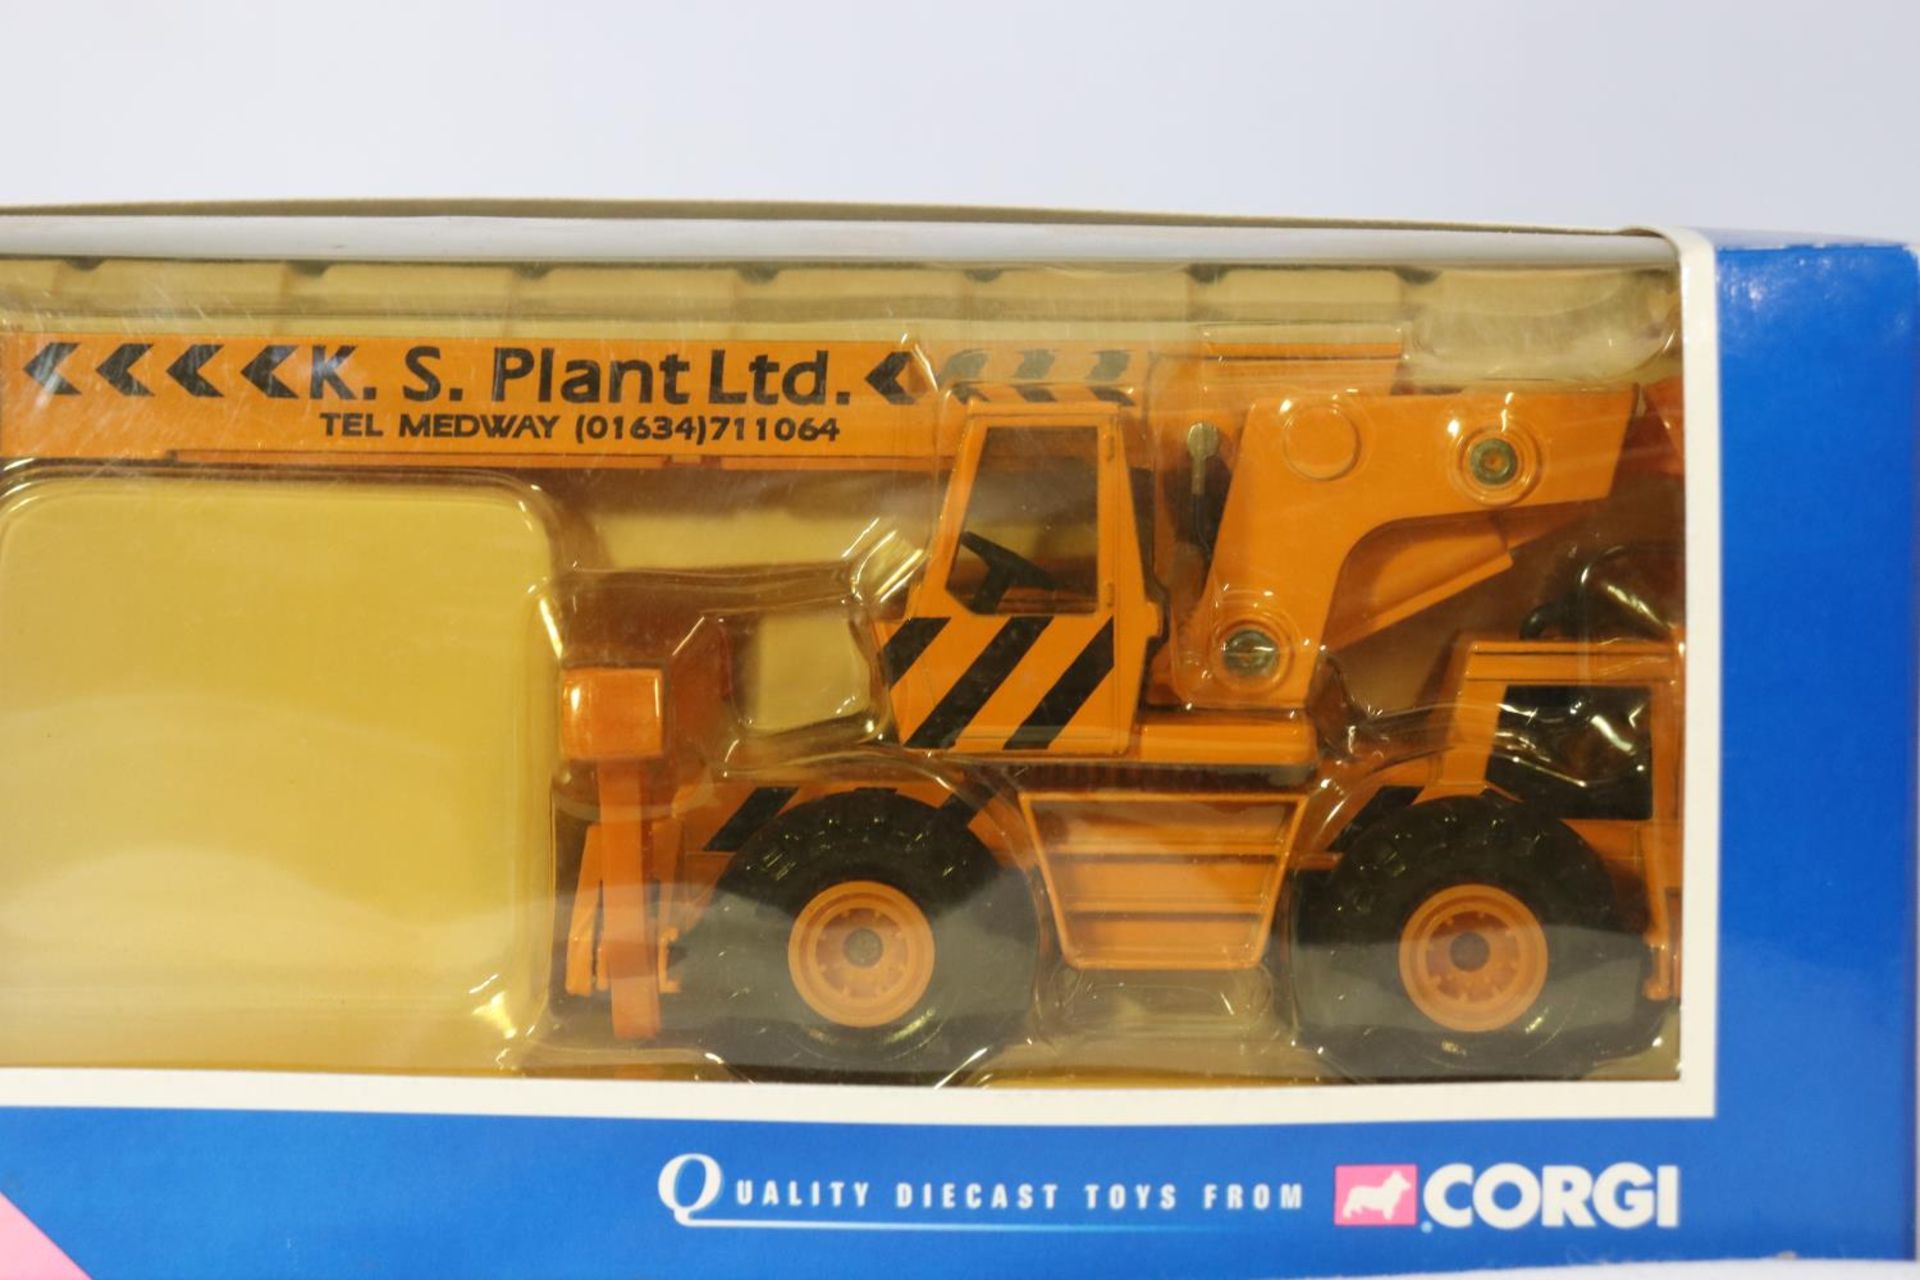 A DIECAST CORGI MOBILE CRANE - KS PLANT HIRE WITH ELEVATING AND EXTENDING CRANE WITH HOOK, REVOLVING - Image 4 of 4